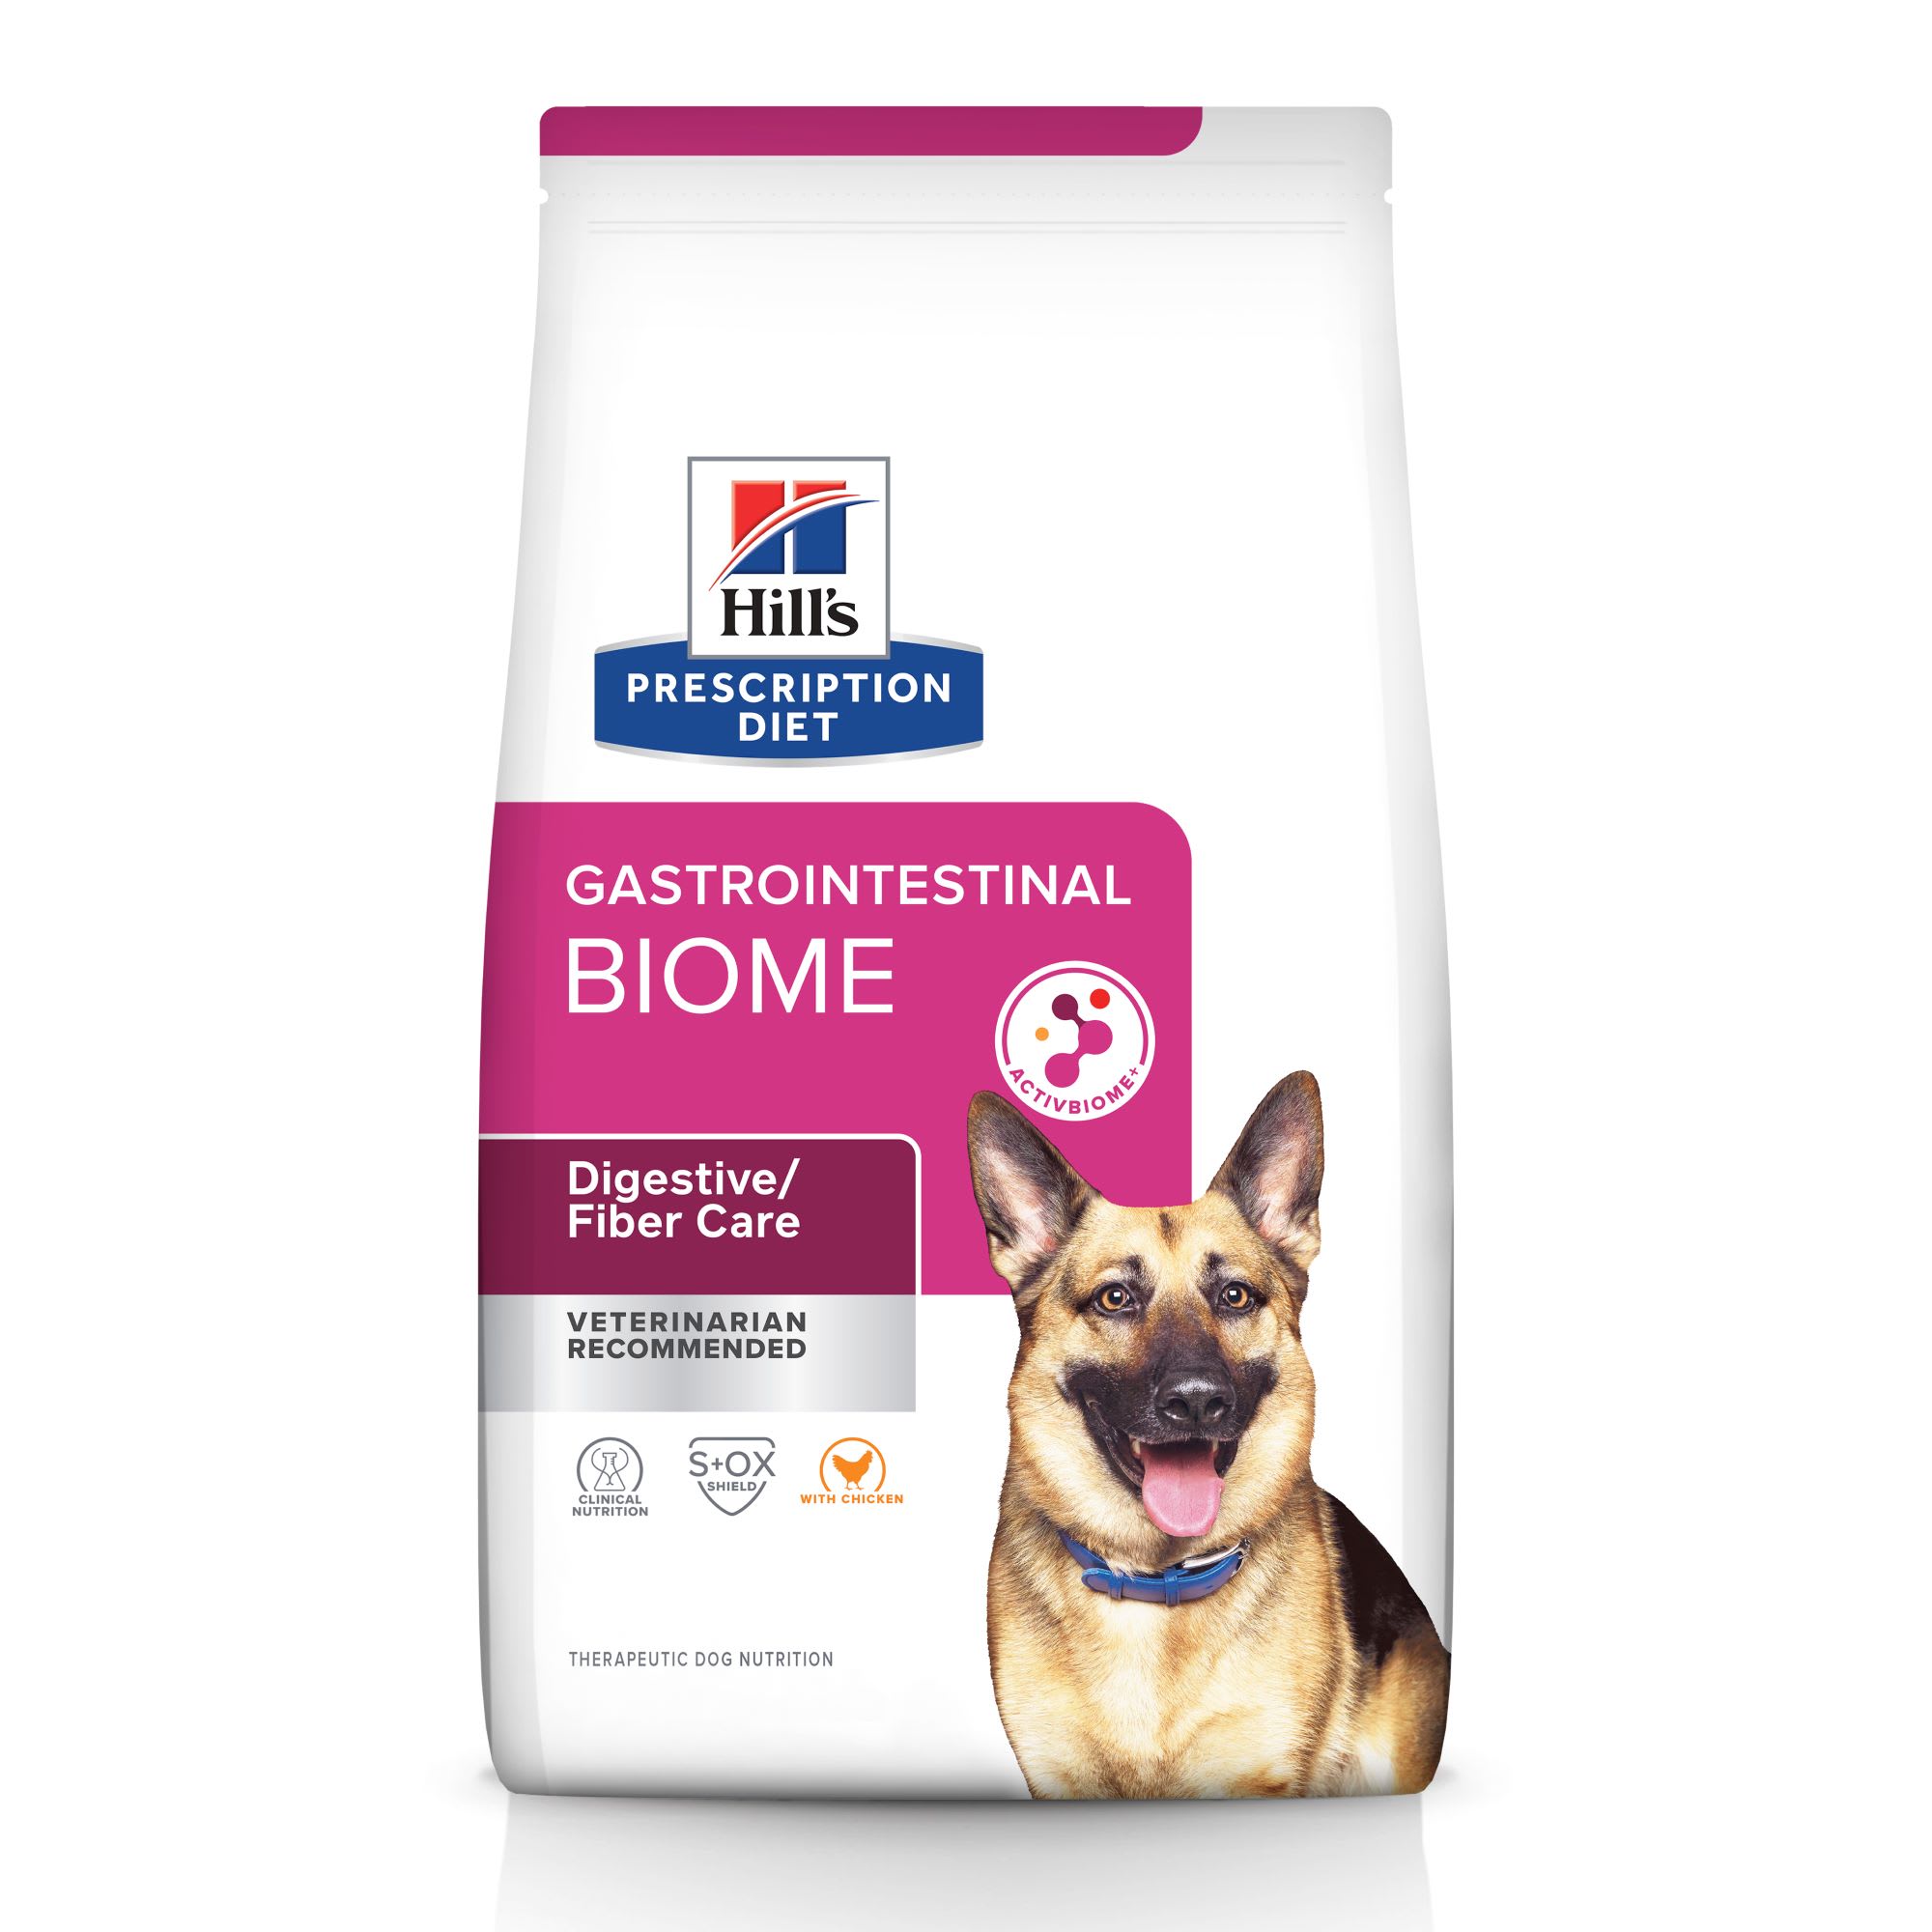 Hill's Prescription Diet Gastrointestinal Biome Digestive/Fiber Care with  Chicken Dry Dog food, 27.5 lbs.